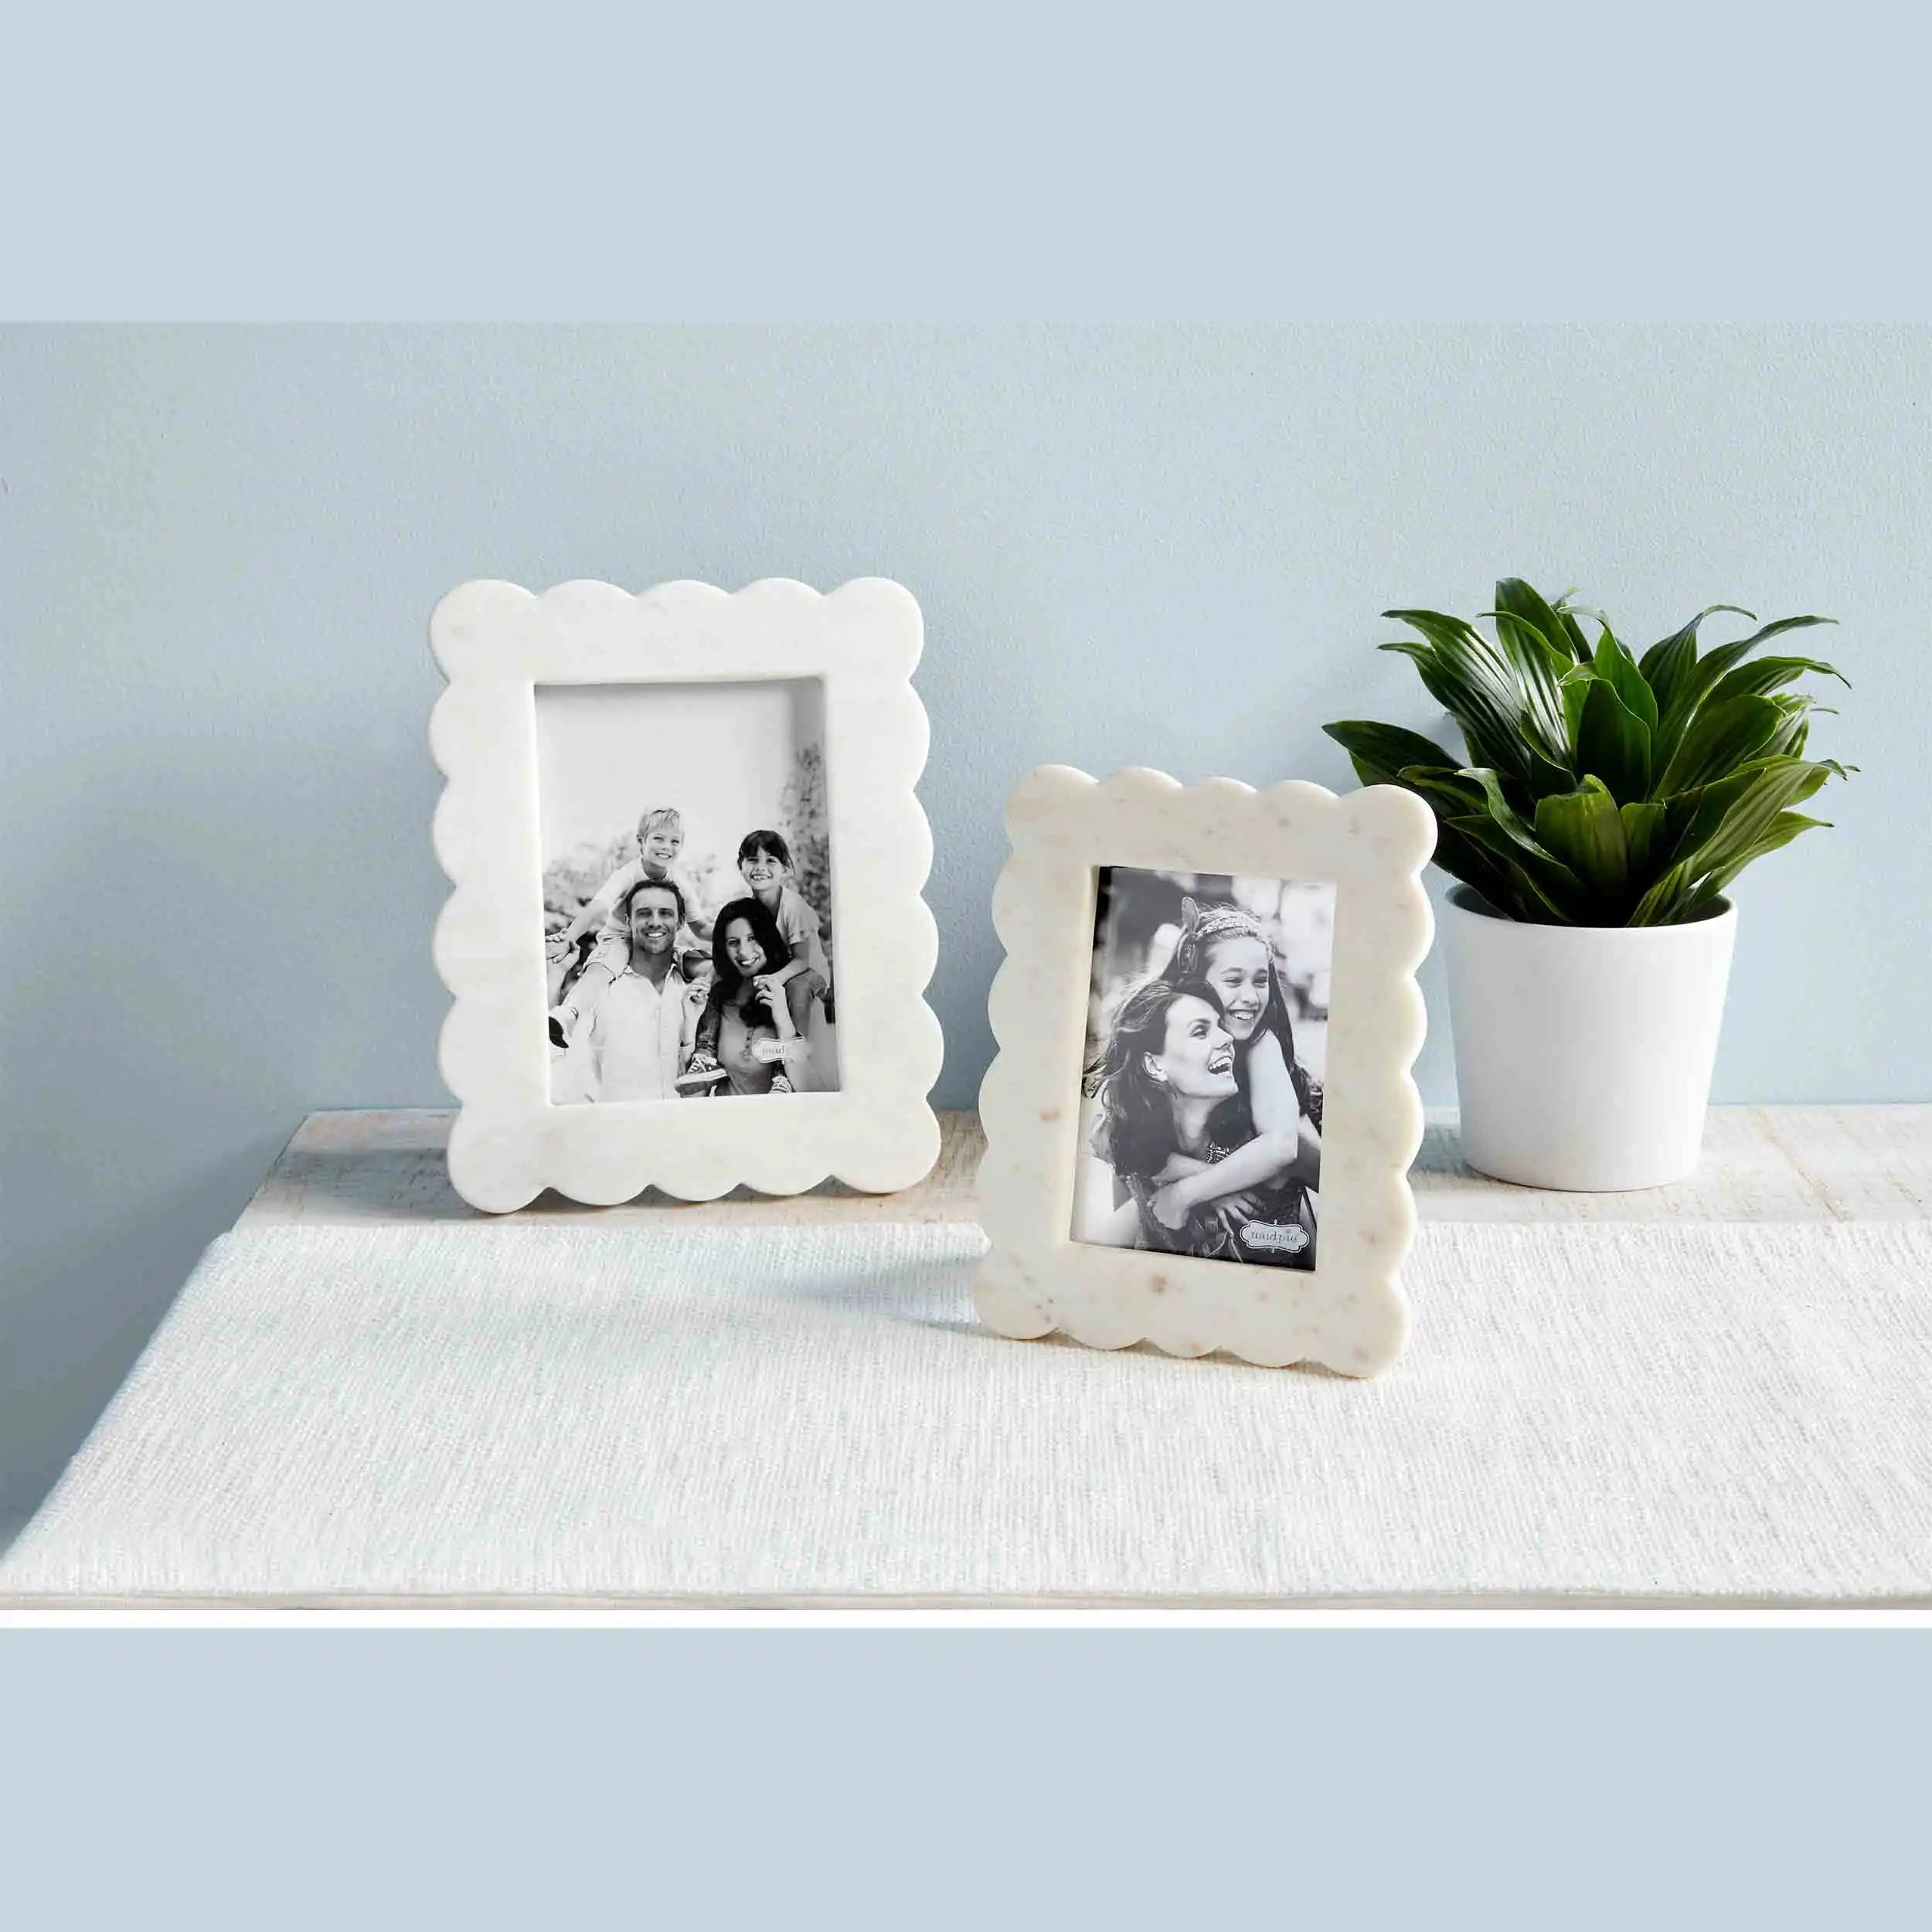 Scalloped Marble Picture Frame - 5x7